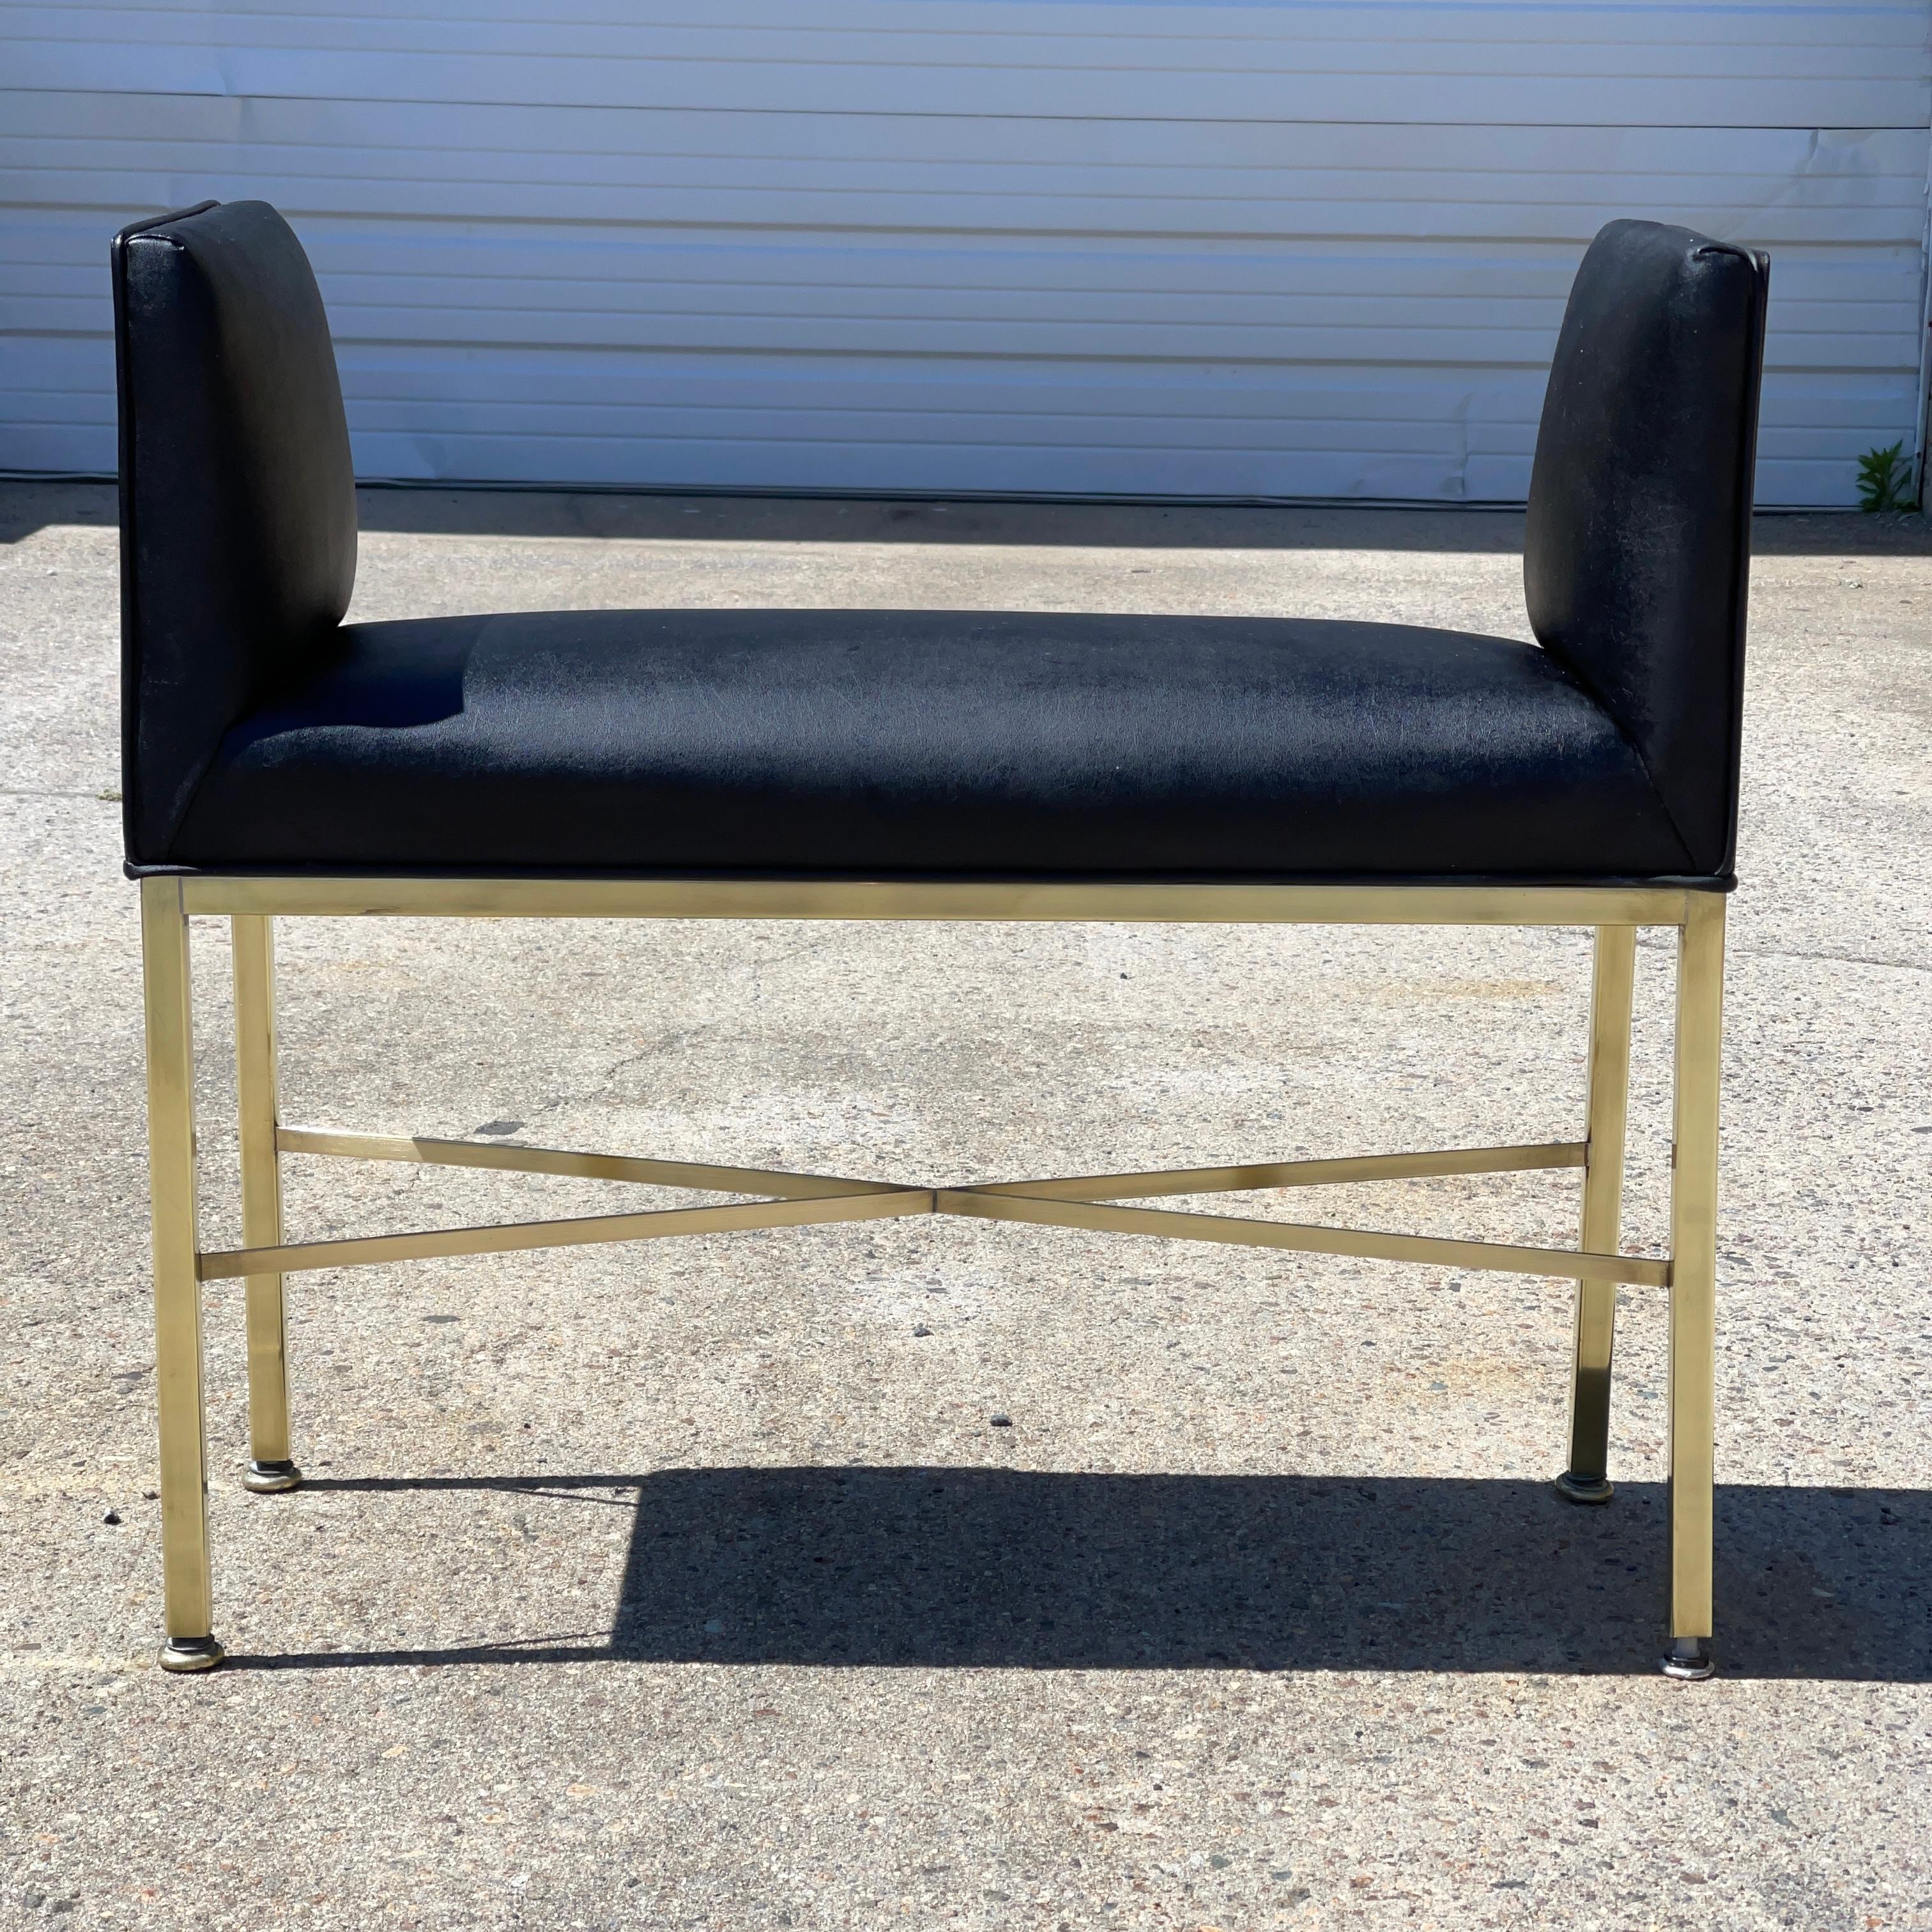 Solid brass square bar x-form bench seat by Paul McCobb for Calvin Furniture with black leatherette upholstered seat with raised sides and inset brass trimmed handles. 26